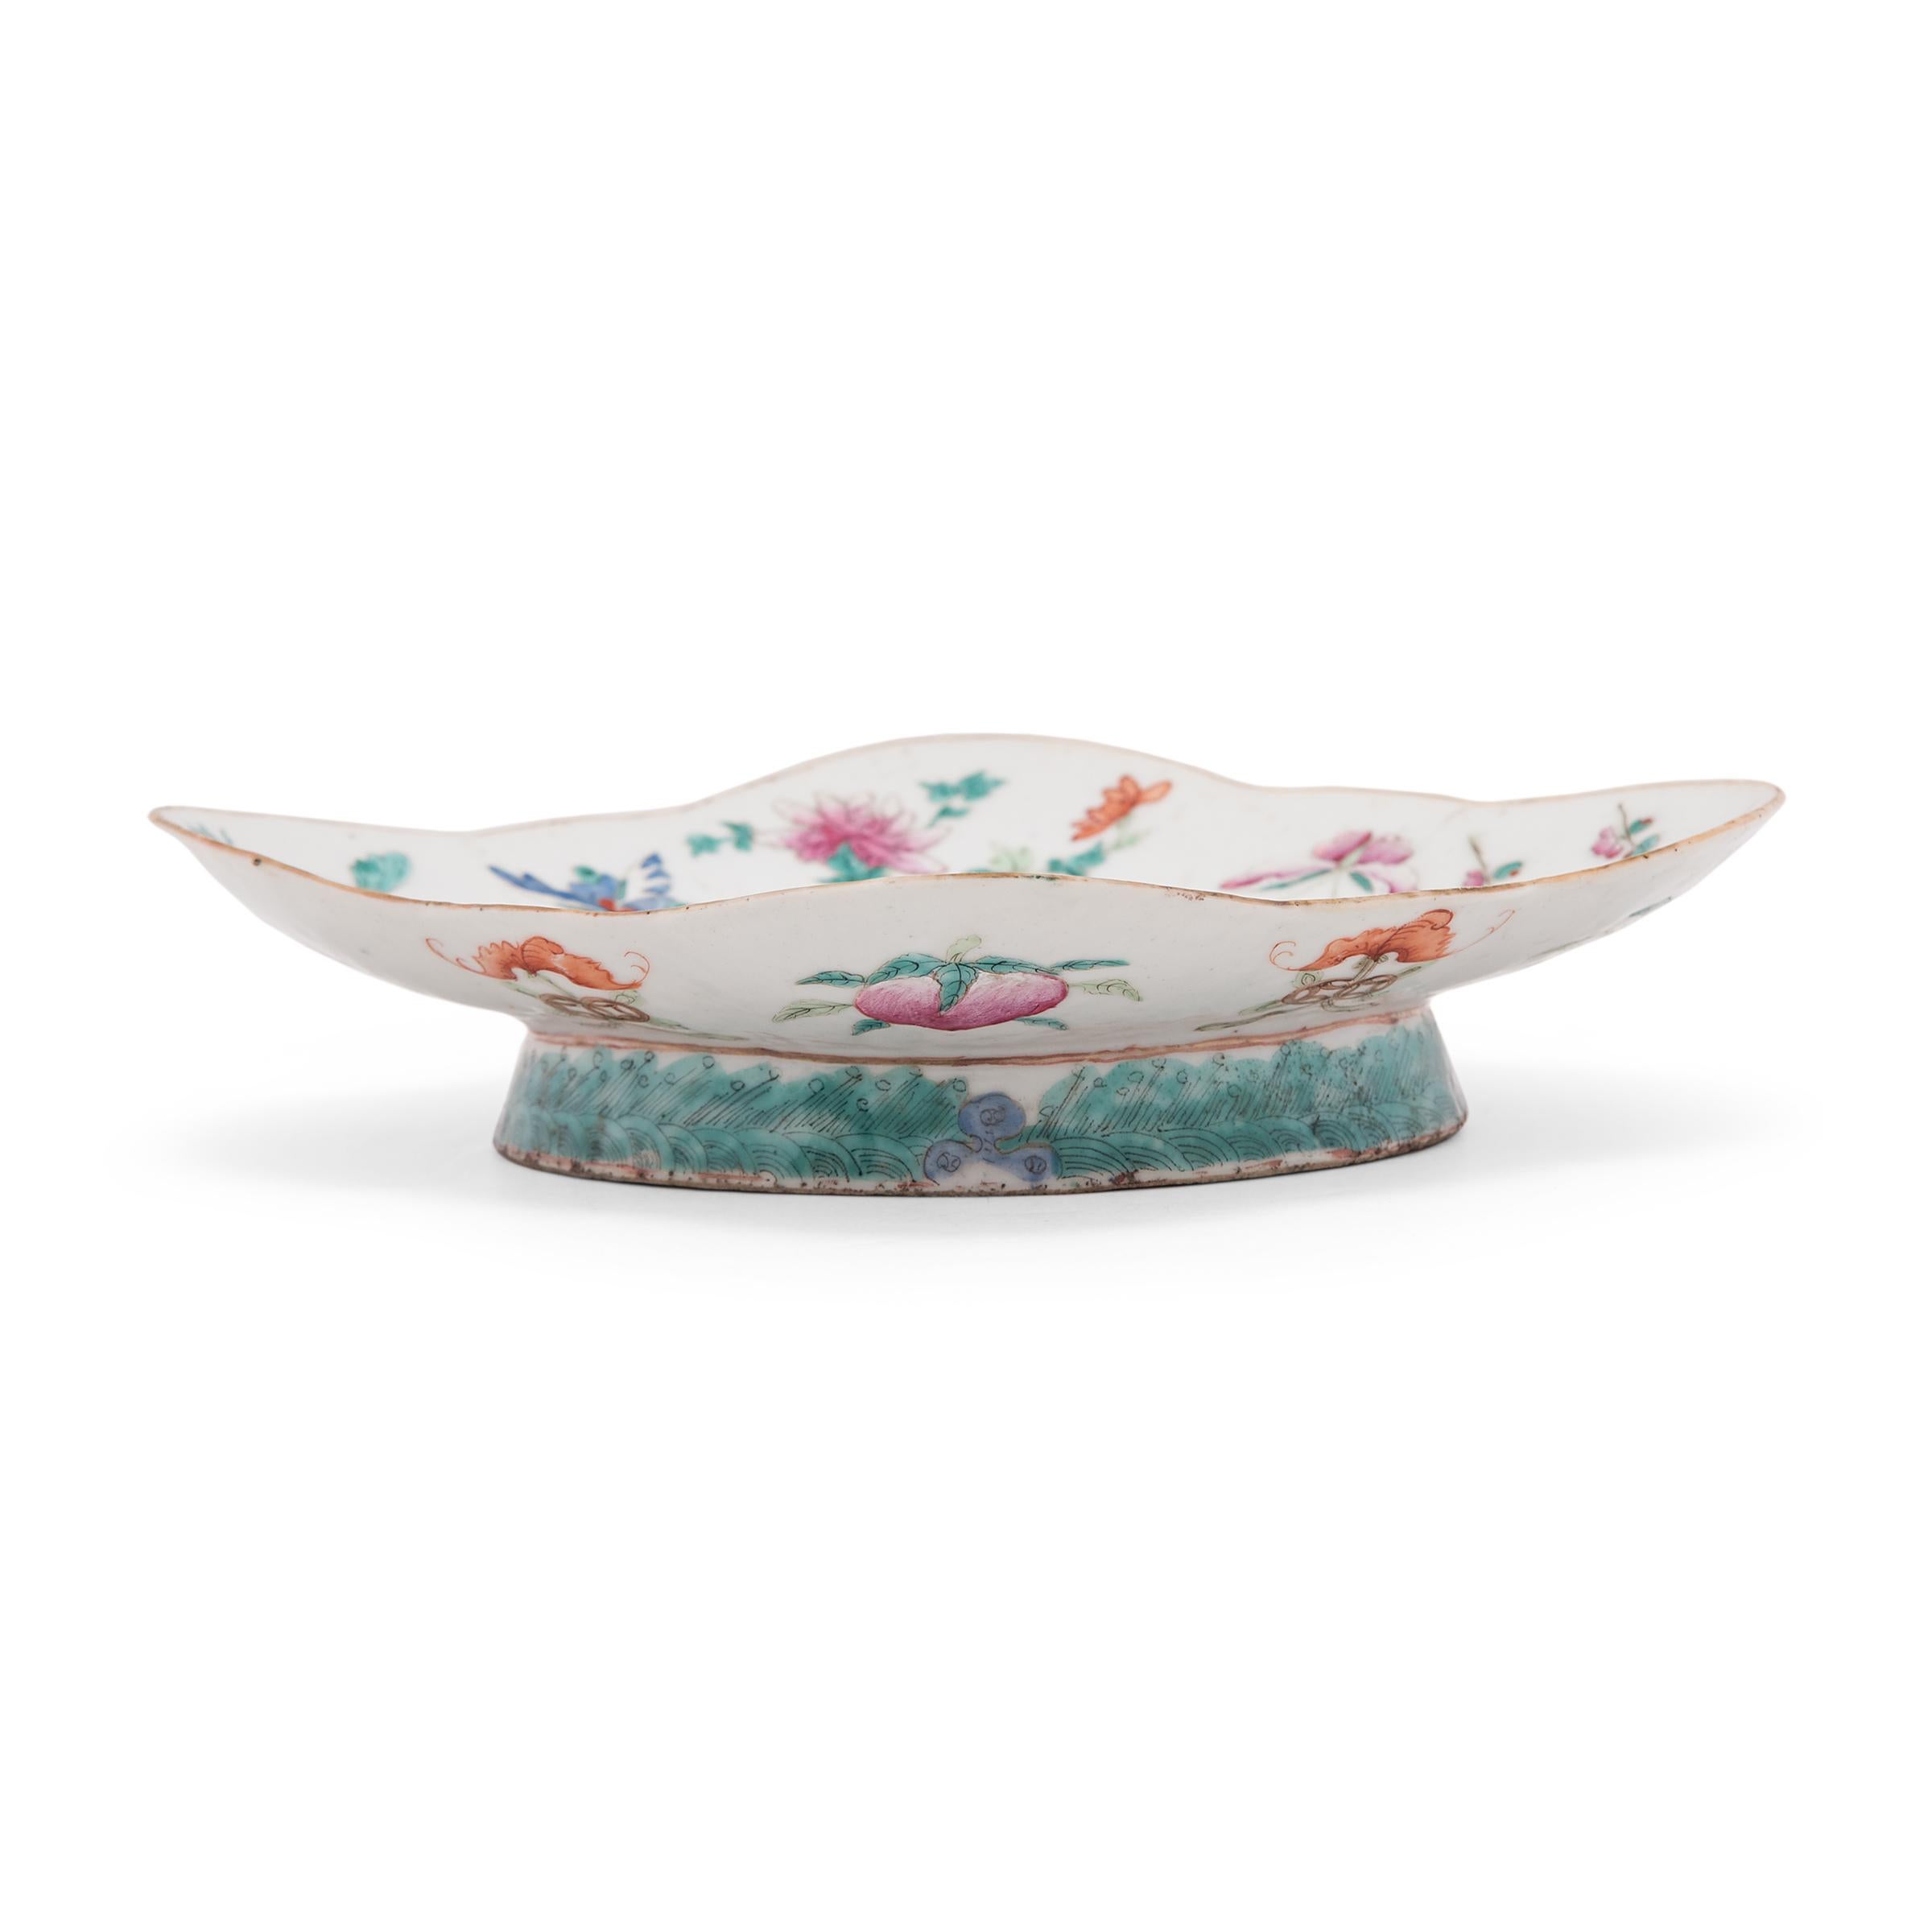 Enameled Chinese Footed Offering Bowl with Mythical Figures, c. 1850 For Sale